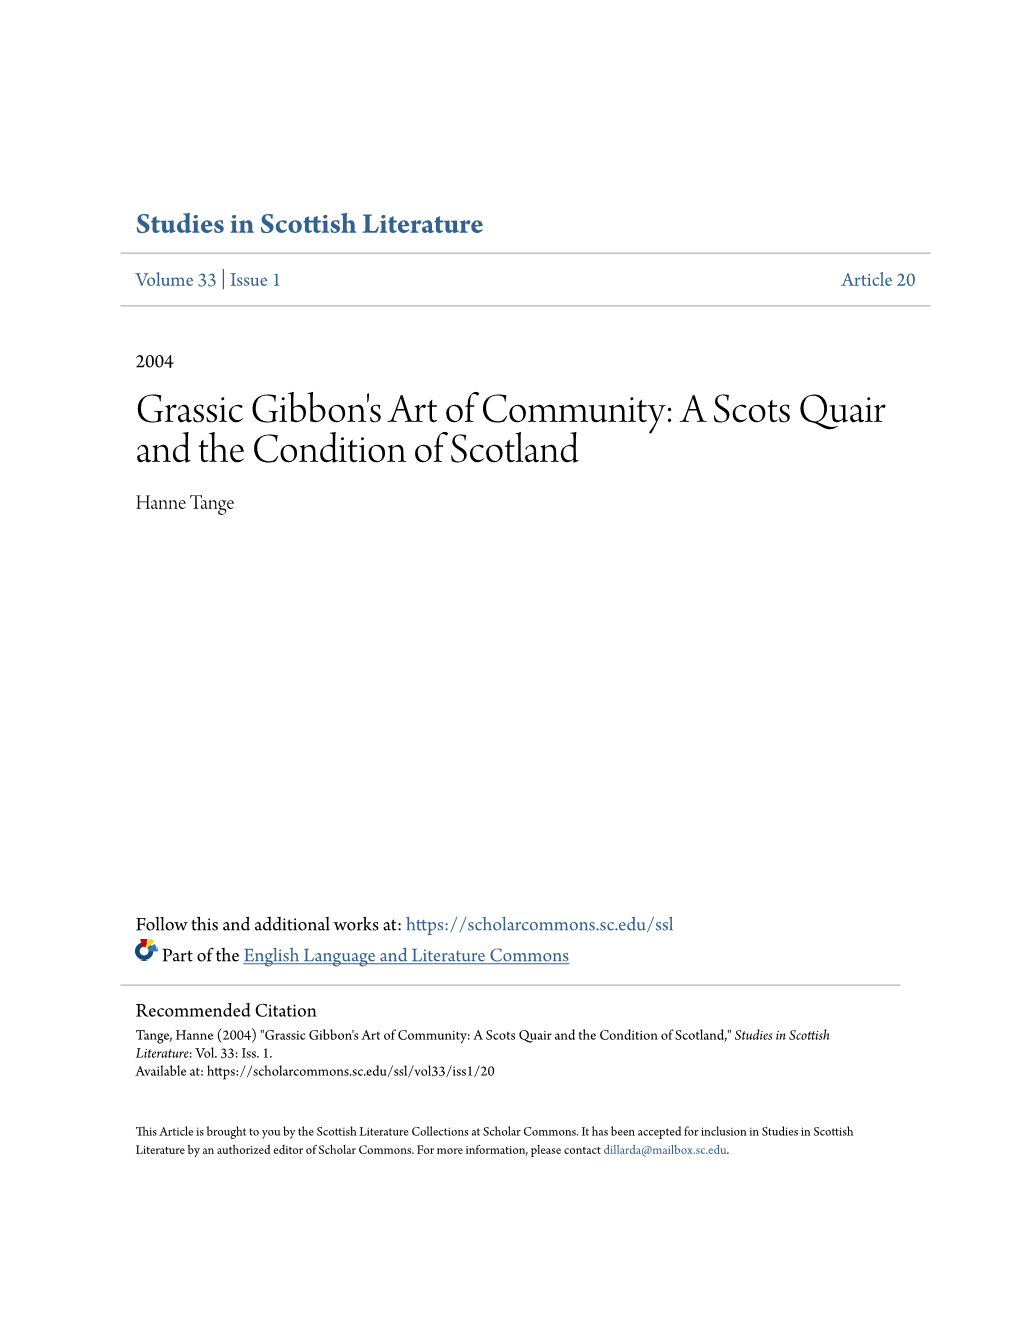 A Scots Quair and the Condition of Scotland Hanne Tange